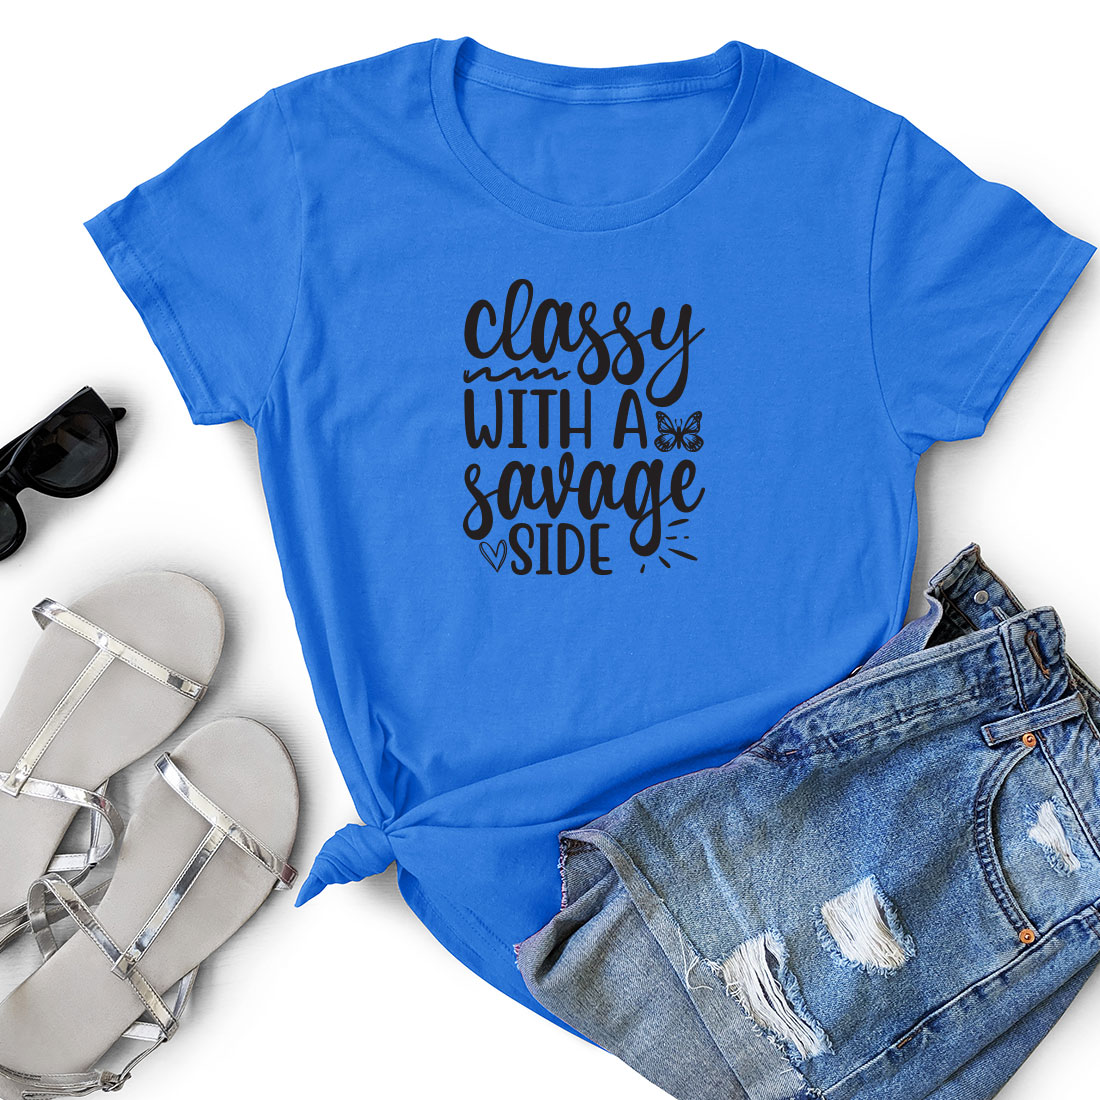 T - shirt that says classy with a swage side.